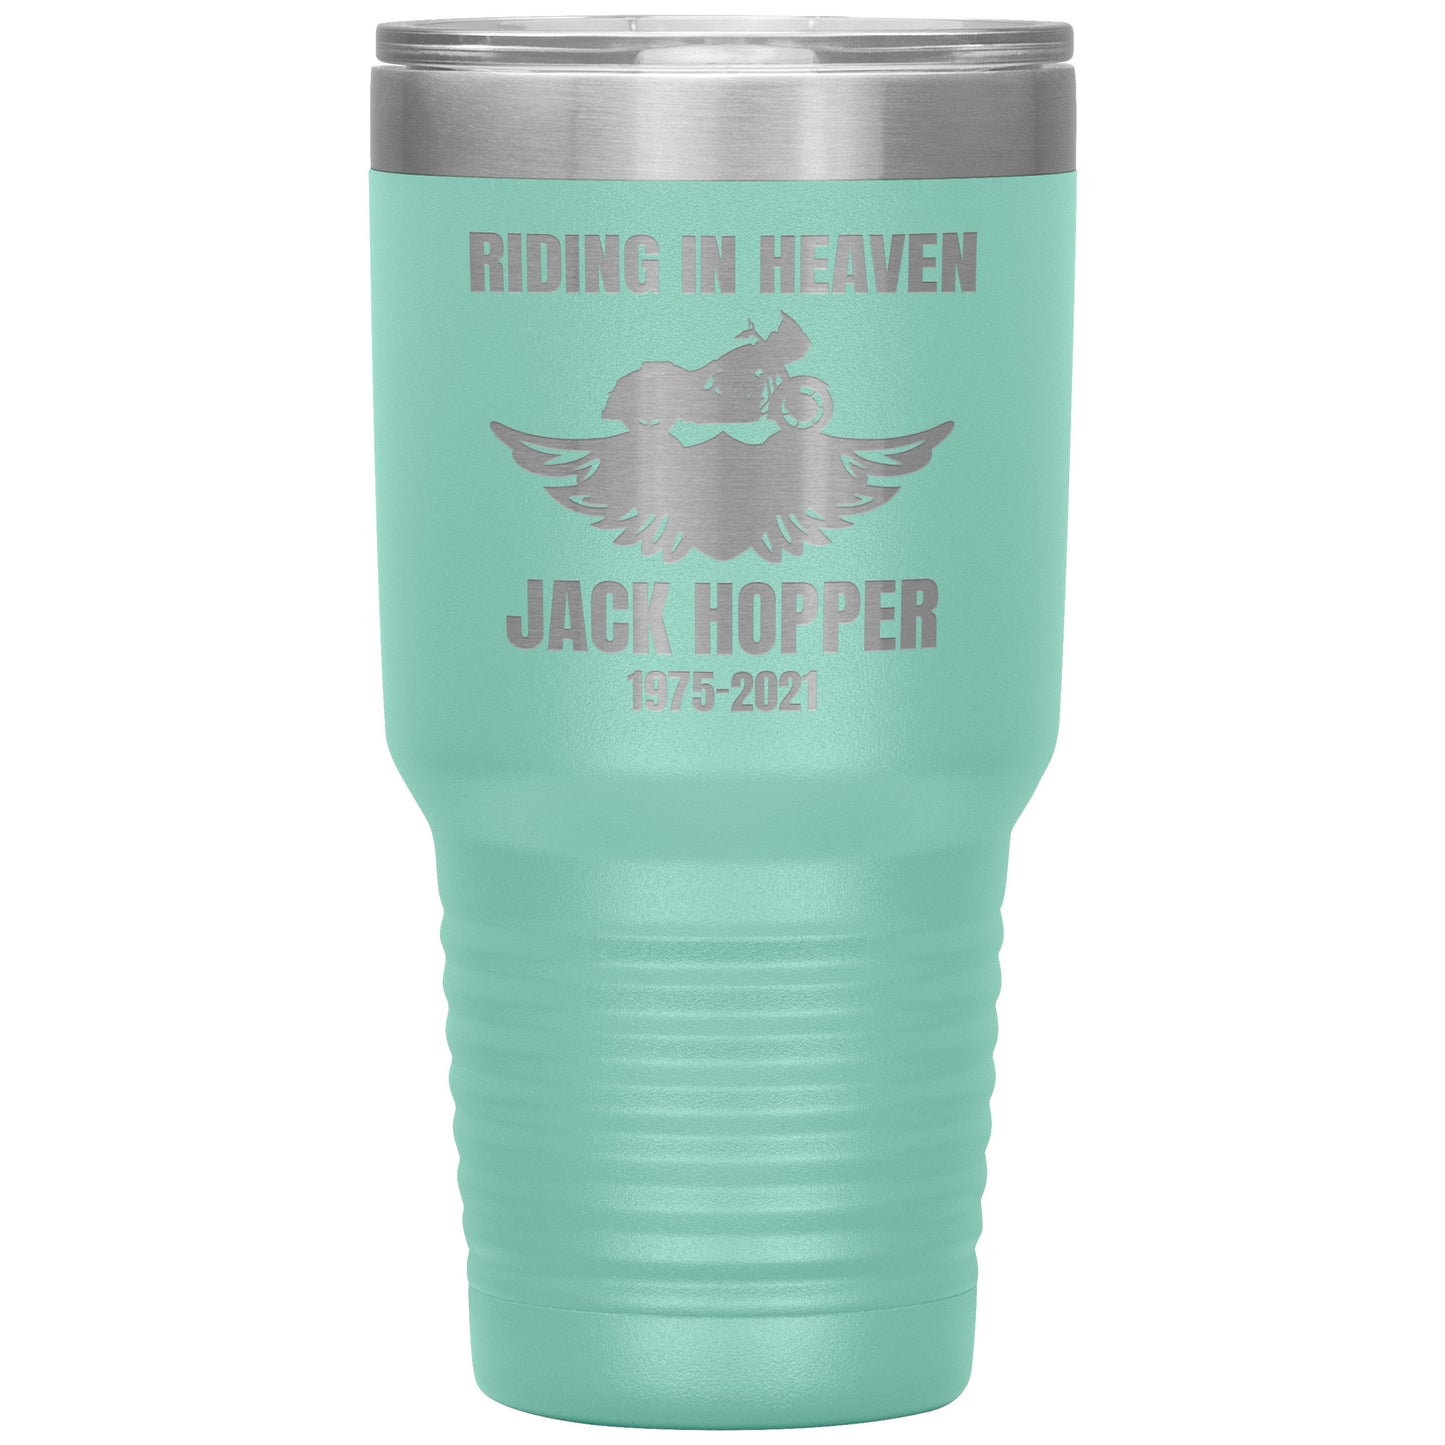 Riding in Heaven 30oz Insulated Tumbler